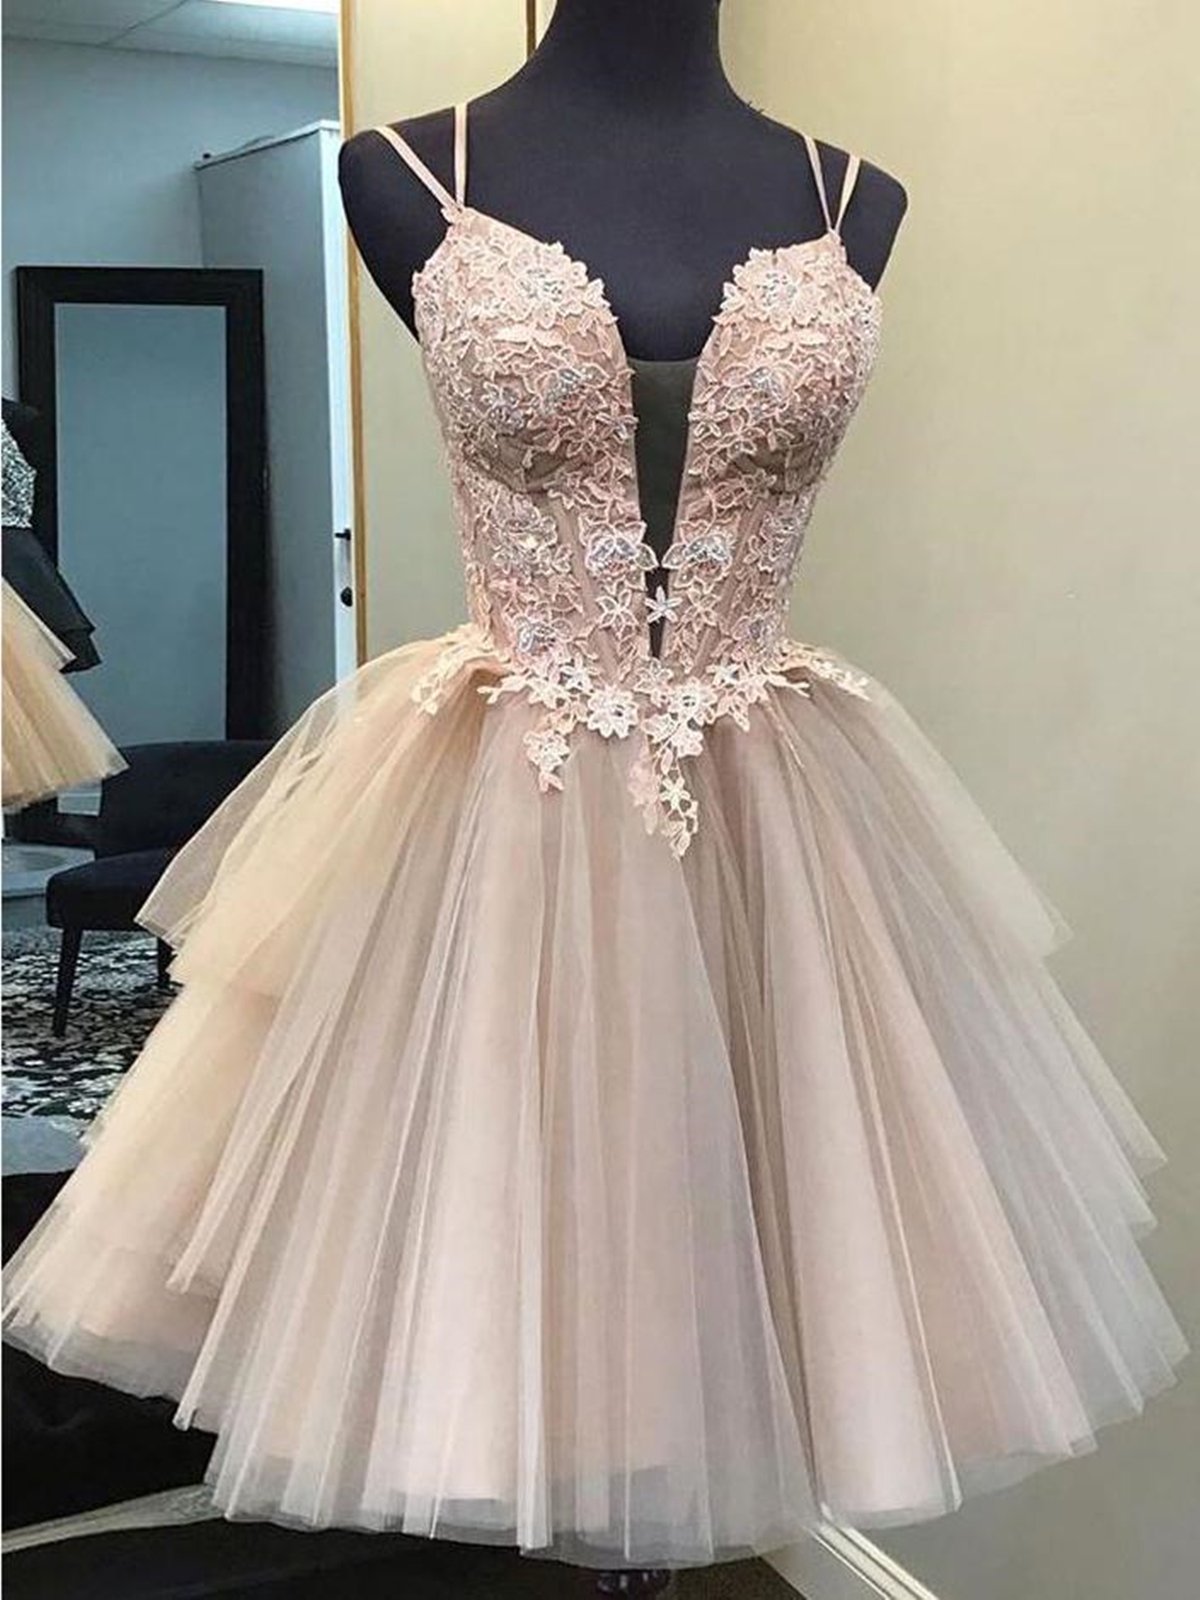 Short Backless Champagne Lace Corset Prom Dresses, Short V Neck Champagne Lace Graduation Corset Homecoming Dresses outfit, Prom Theme